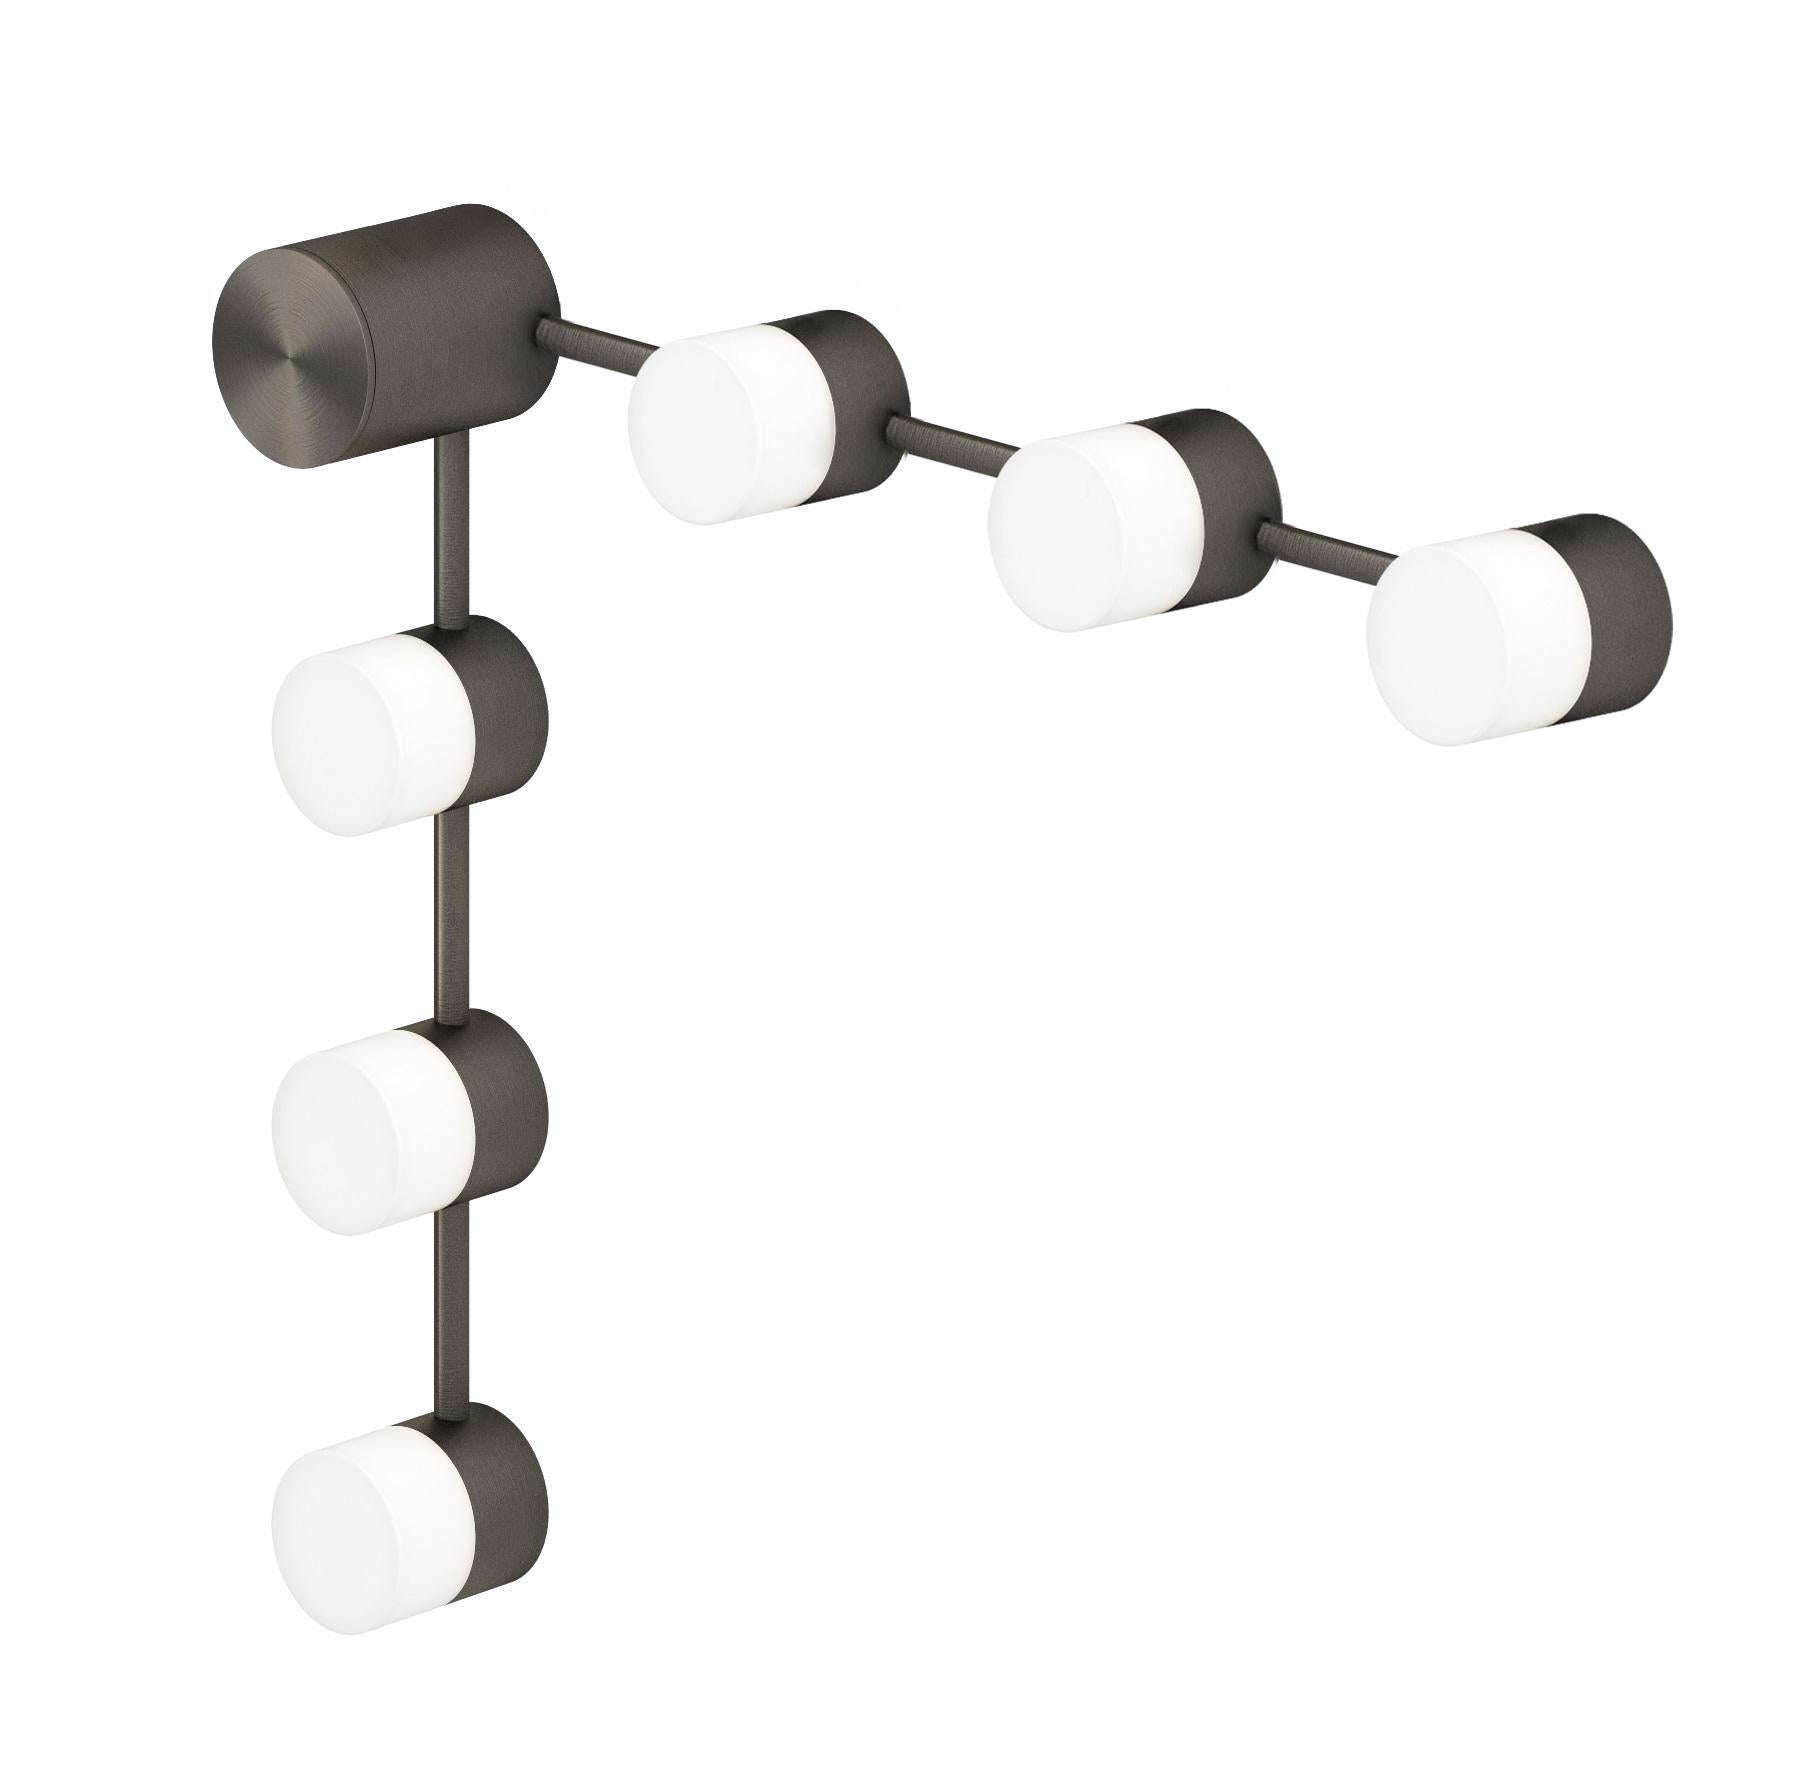 IP Backstage C6 satin graphite wall light by Emilie Cathelineau
Dimensions: D39.3 x W39.3 X H9.2 cm
Materials: solid brass, satin graphite
Others finishes and dimensions available.

All our lamps can be wired according to each country. If sold